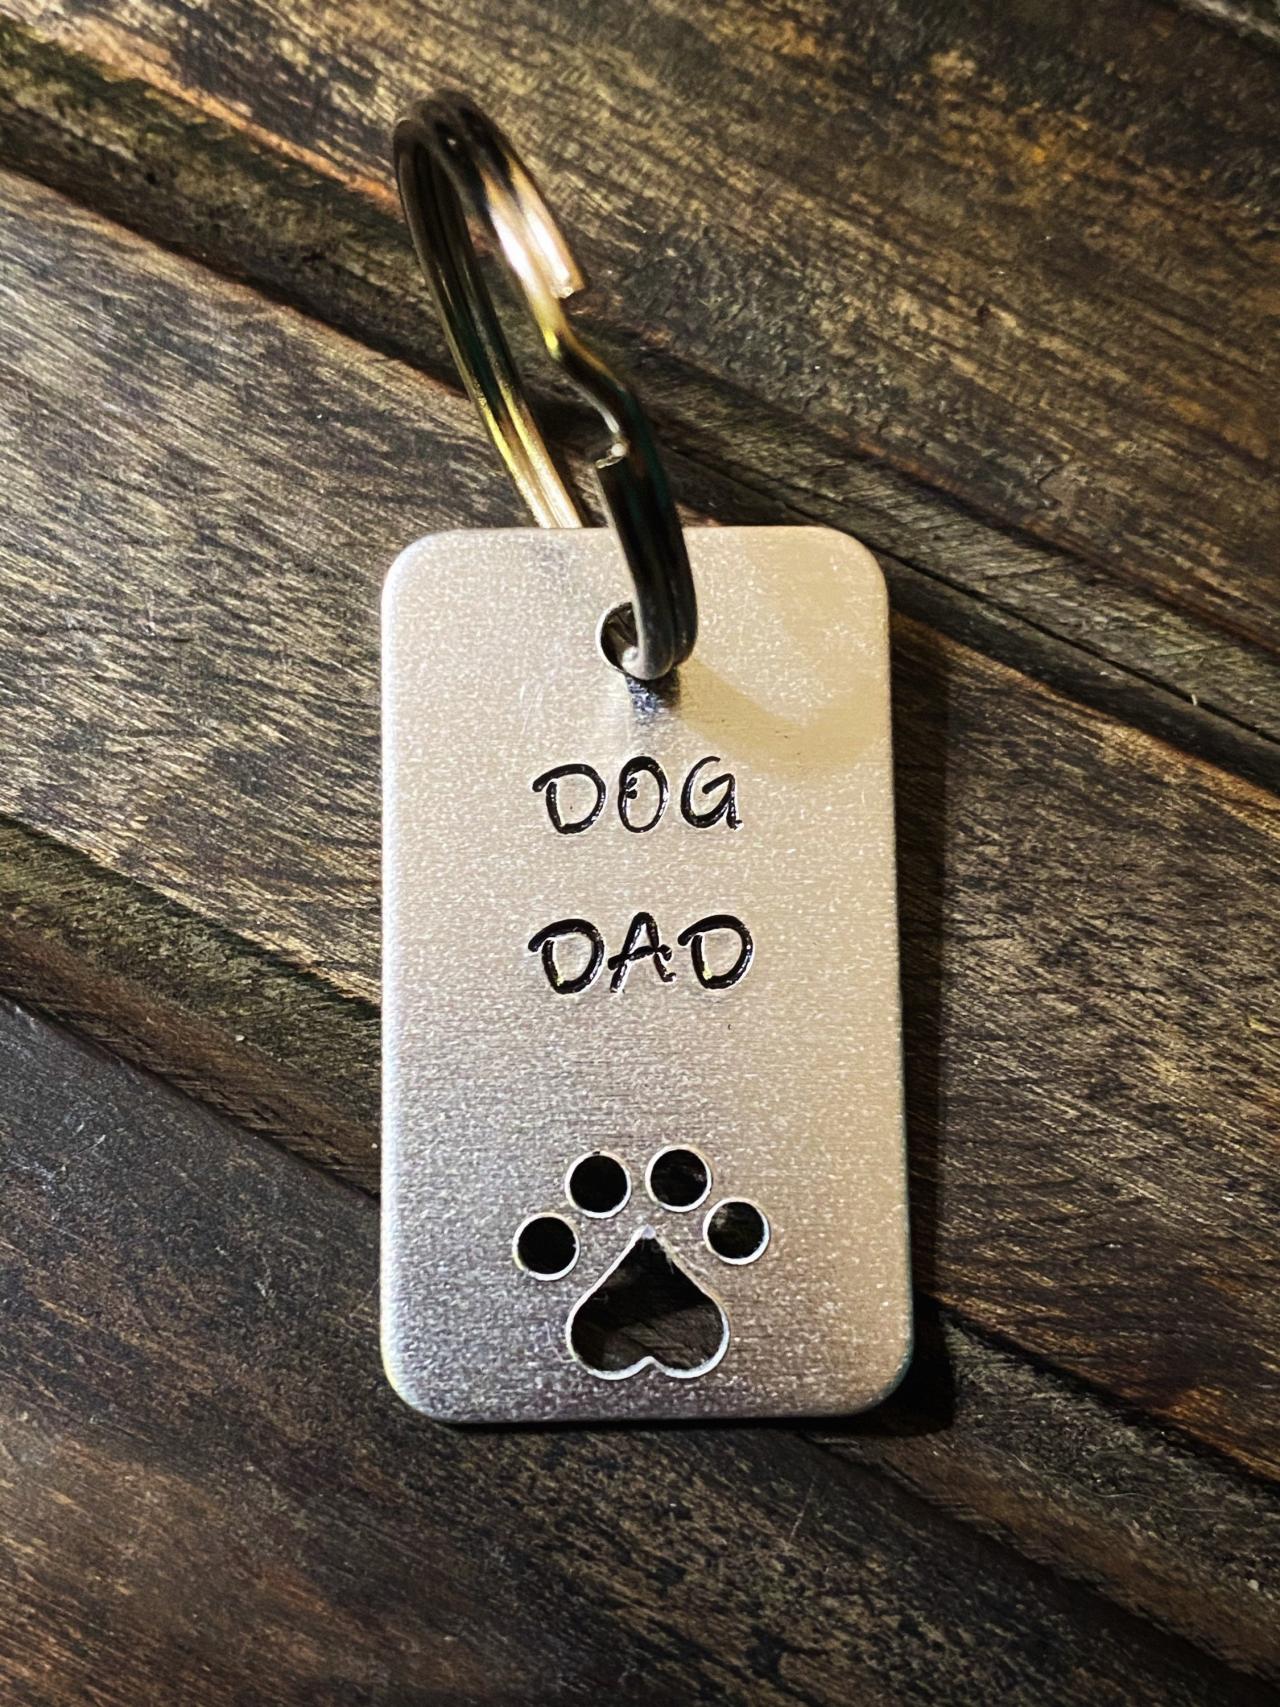 Dog Dad Keychain, Fur Baby Key Chain, Hand Stamped Dog Tag, Gift For Dad; Fathers Day